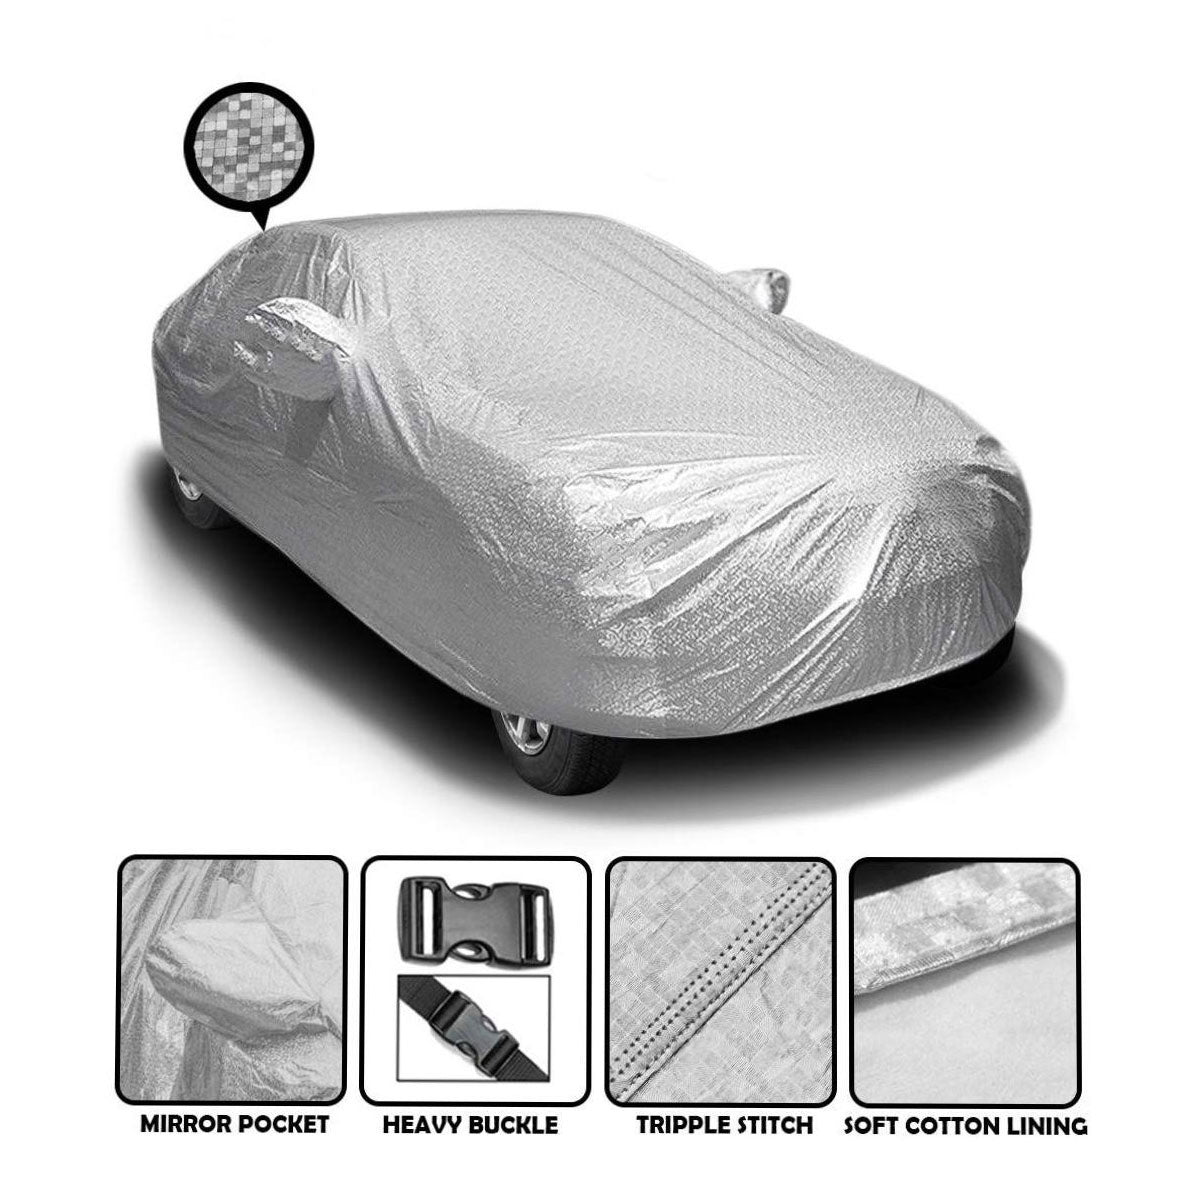 Oshotto Spyro Silver Anti Reflective, dustproof and Water Proof Car Body Cover with Mirror Pockets For Ford Ikon